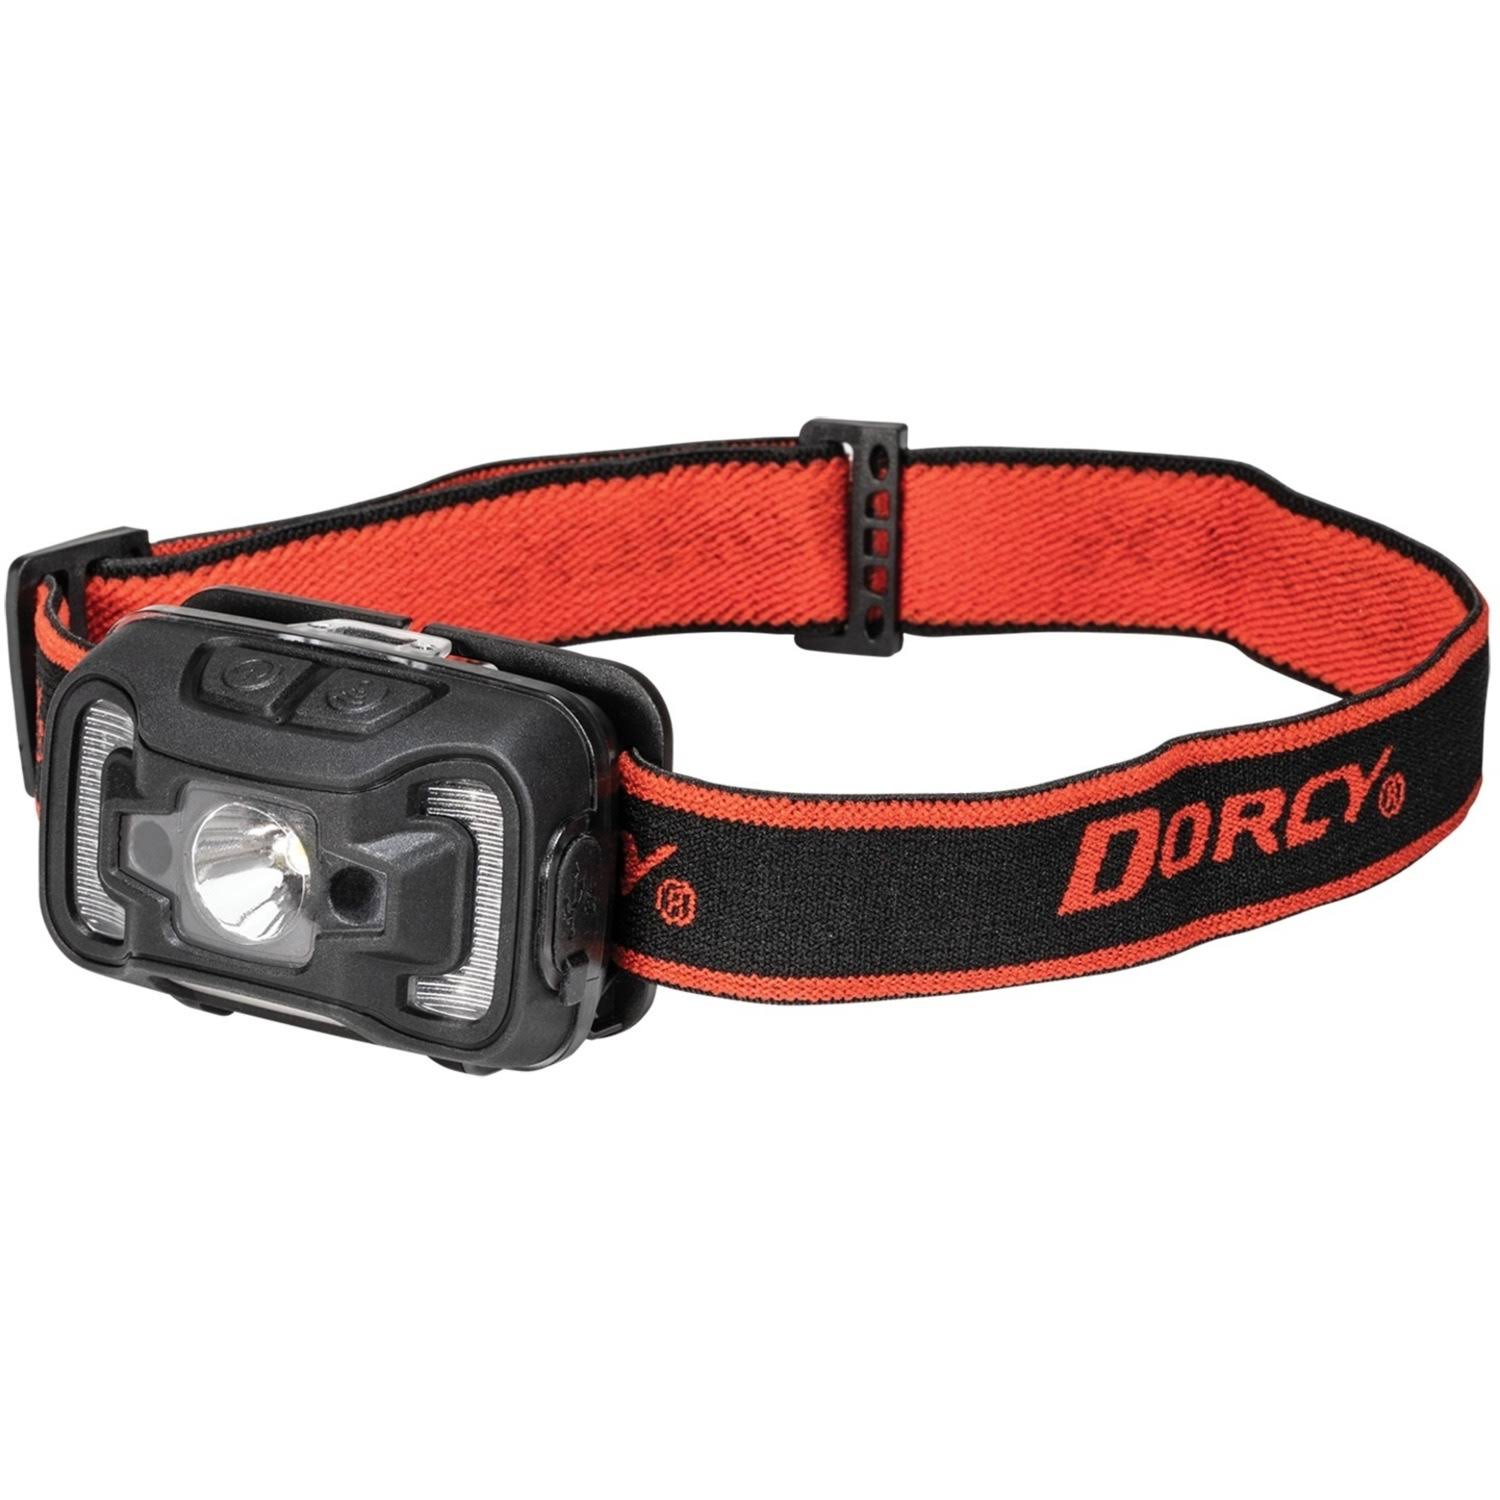 Dorcy 41-4359 Rechargeable Headlamp, 1800 mAh, Lithium-Ion Battery, LED Lamp, 330 Lumens, Spot Beam, Black/Red